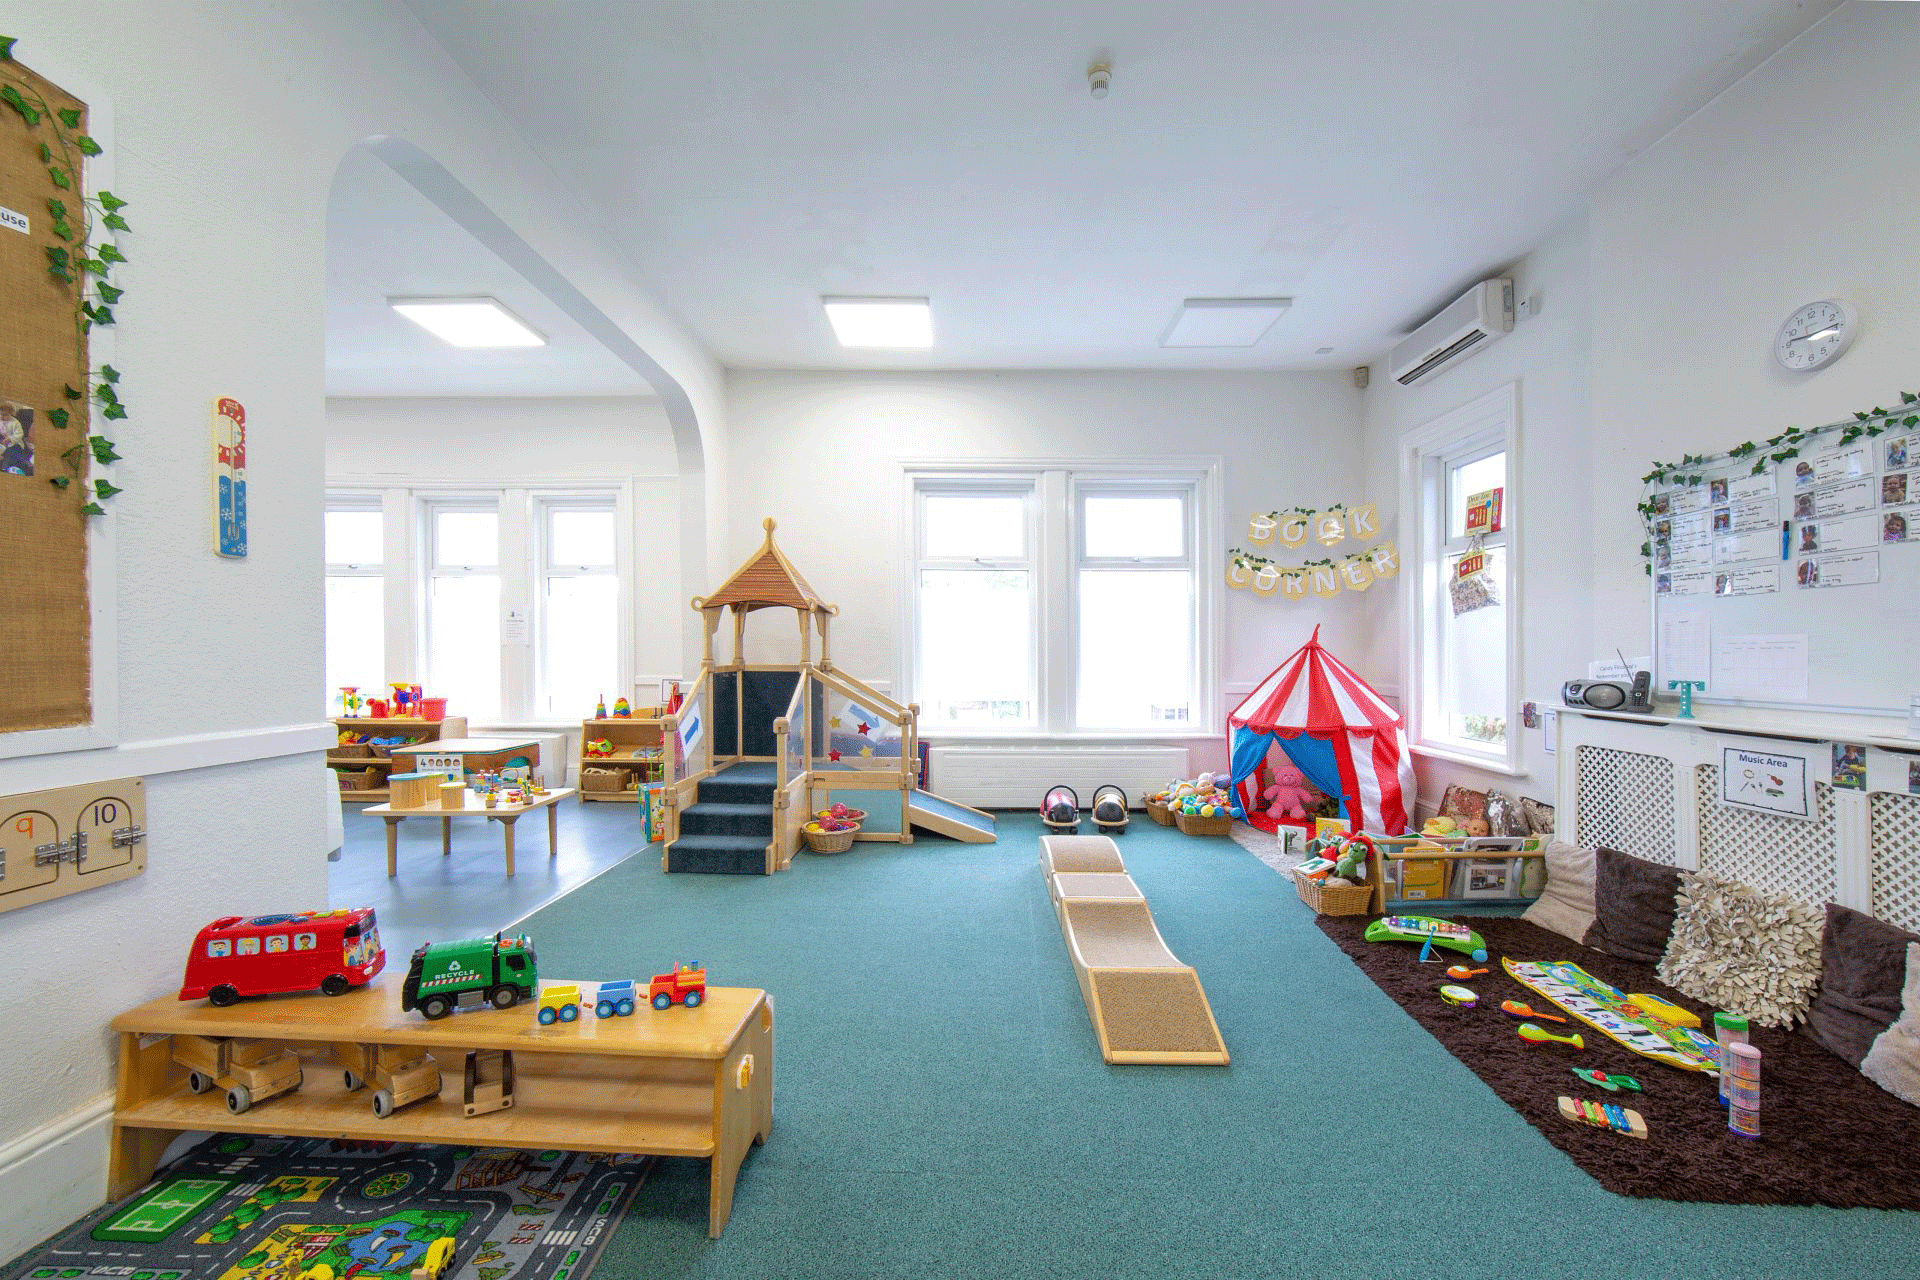 Bright Horizons Portwood Day Nursery and Preschool - toddler room